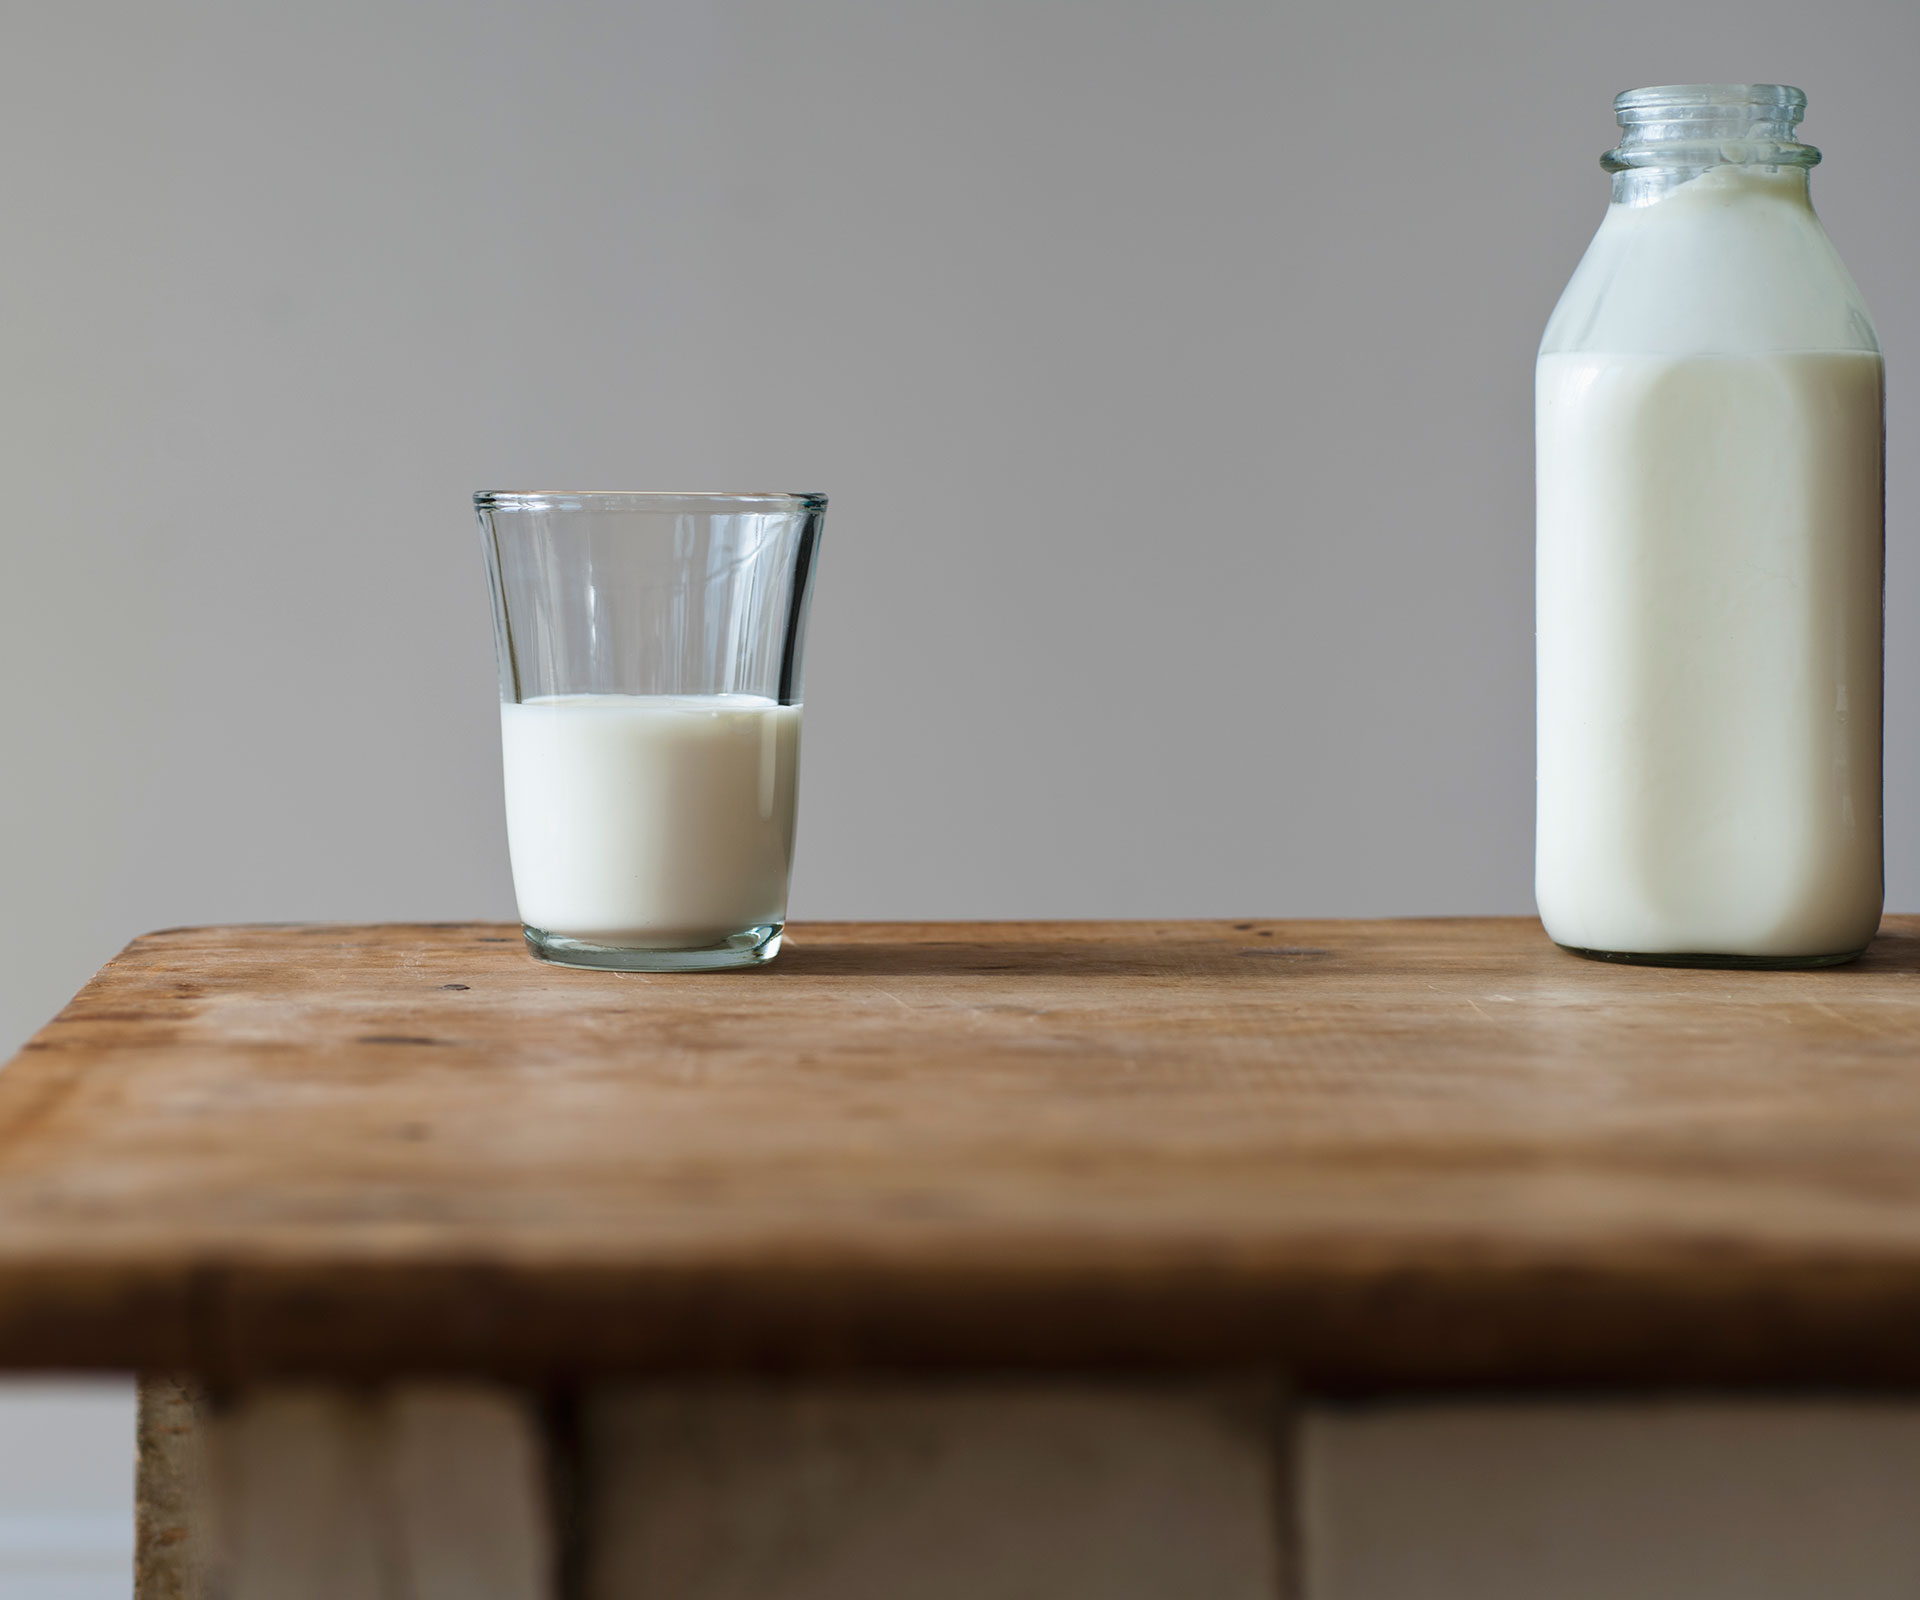 Details about how Coles’ new milk supposed to help struggling dairy farmers